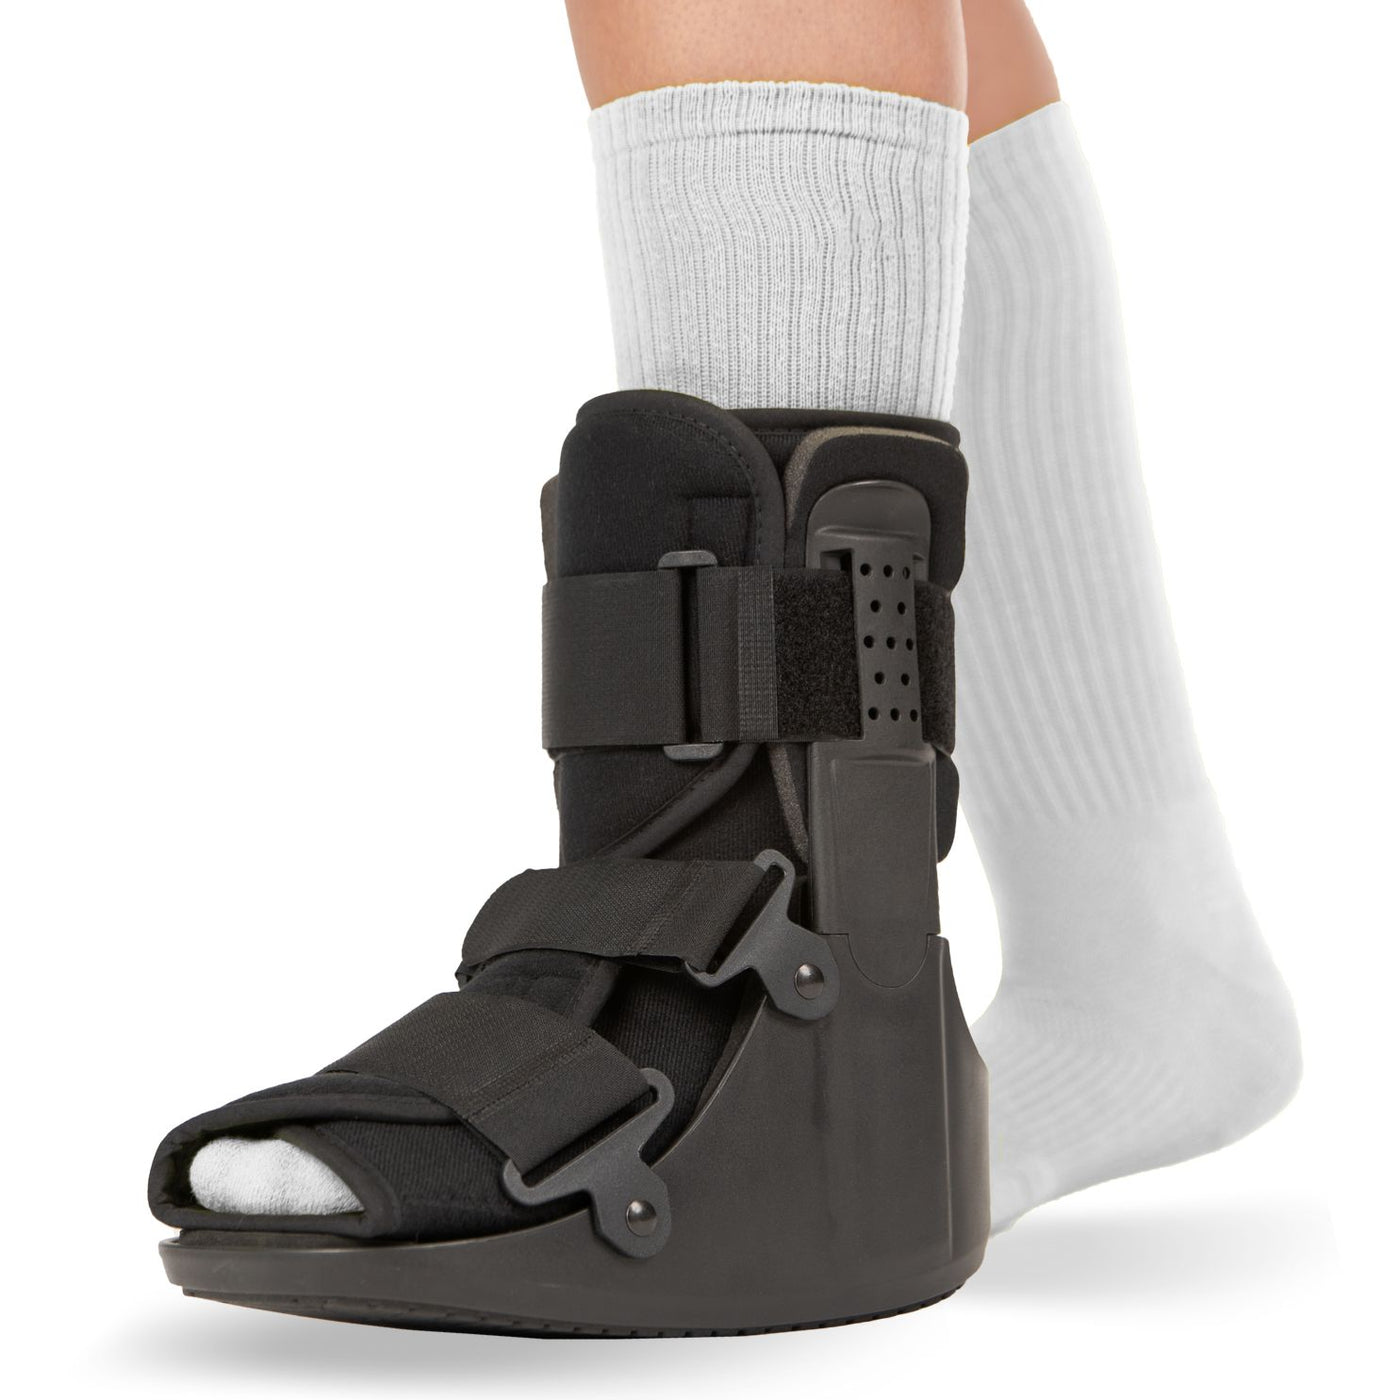 Short broken toe walking boot for fractures and foot injury recovery